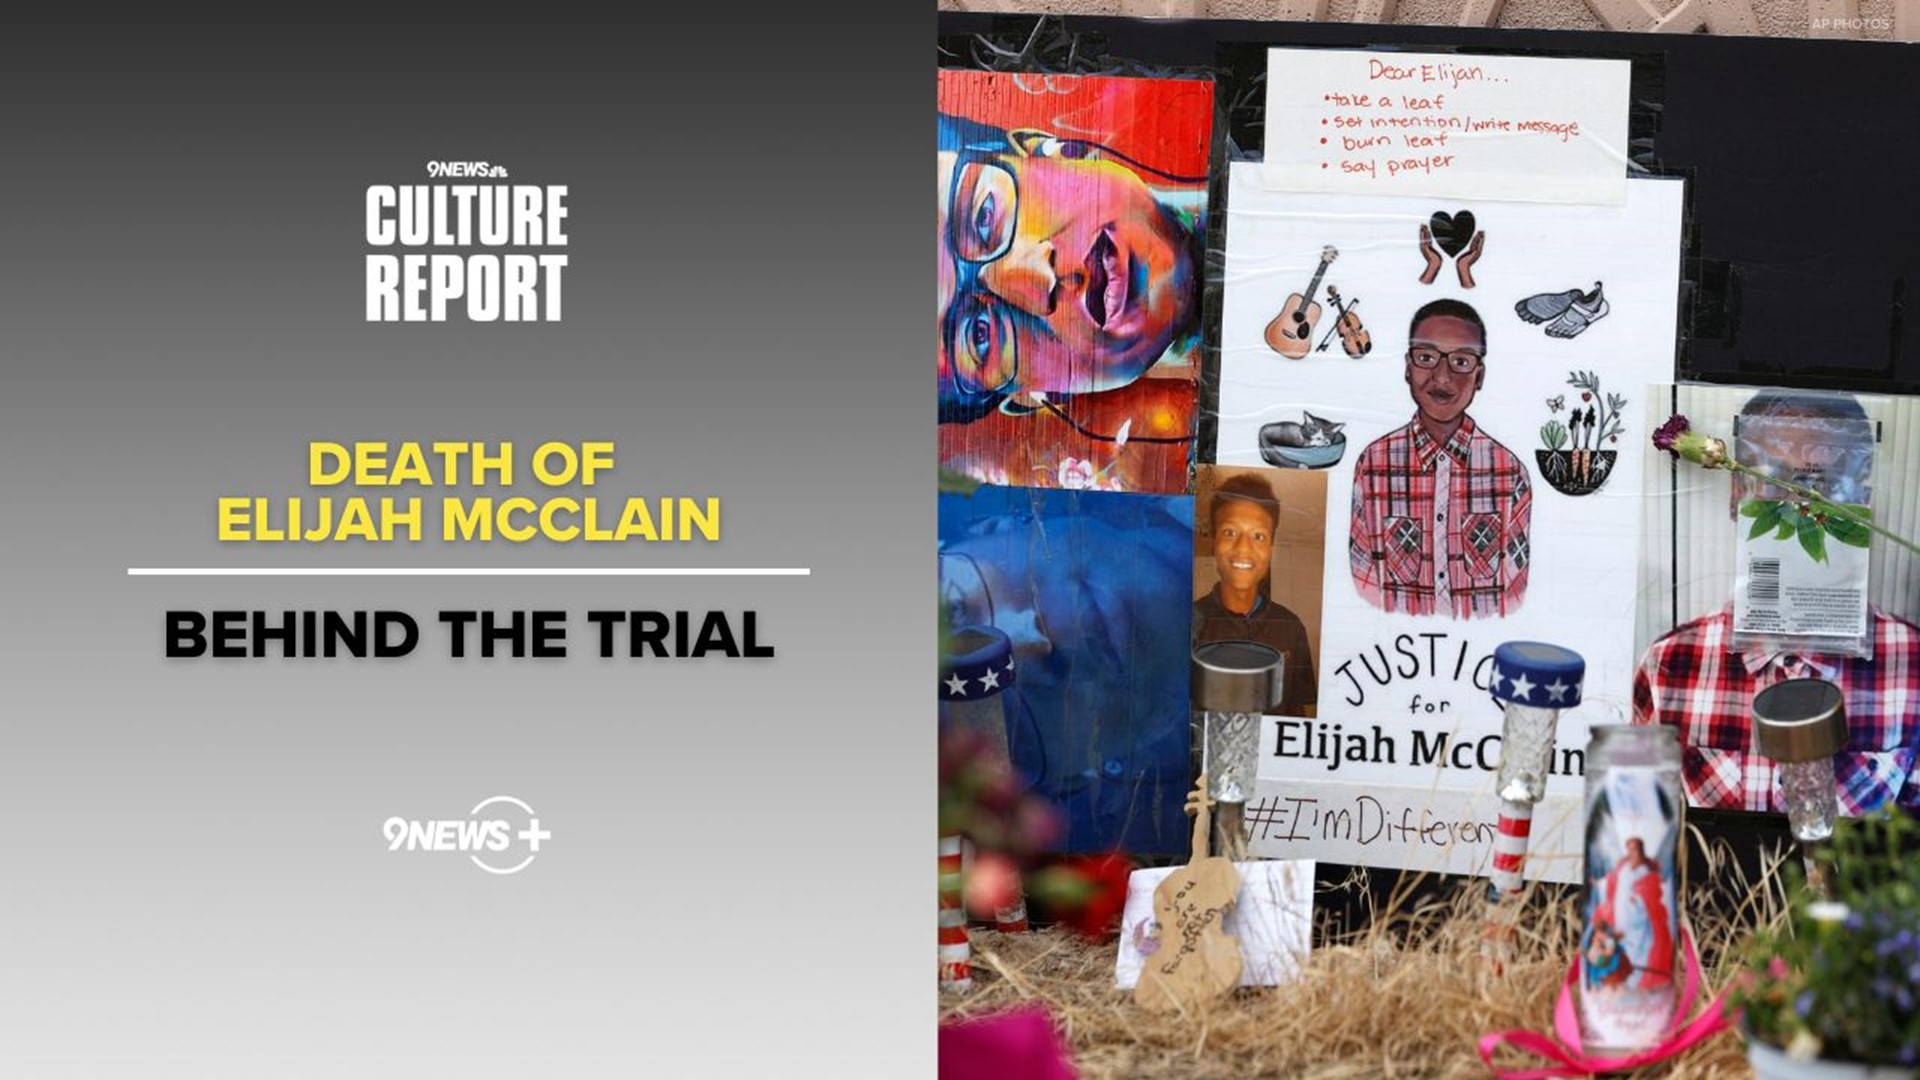 In this week's episode, how a jury reached a verdict in a trial for the officers involved in McClain's death that likely wouldn't have come without the 2020 protests